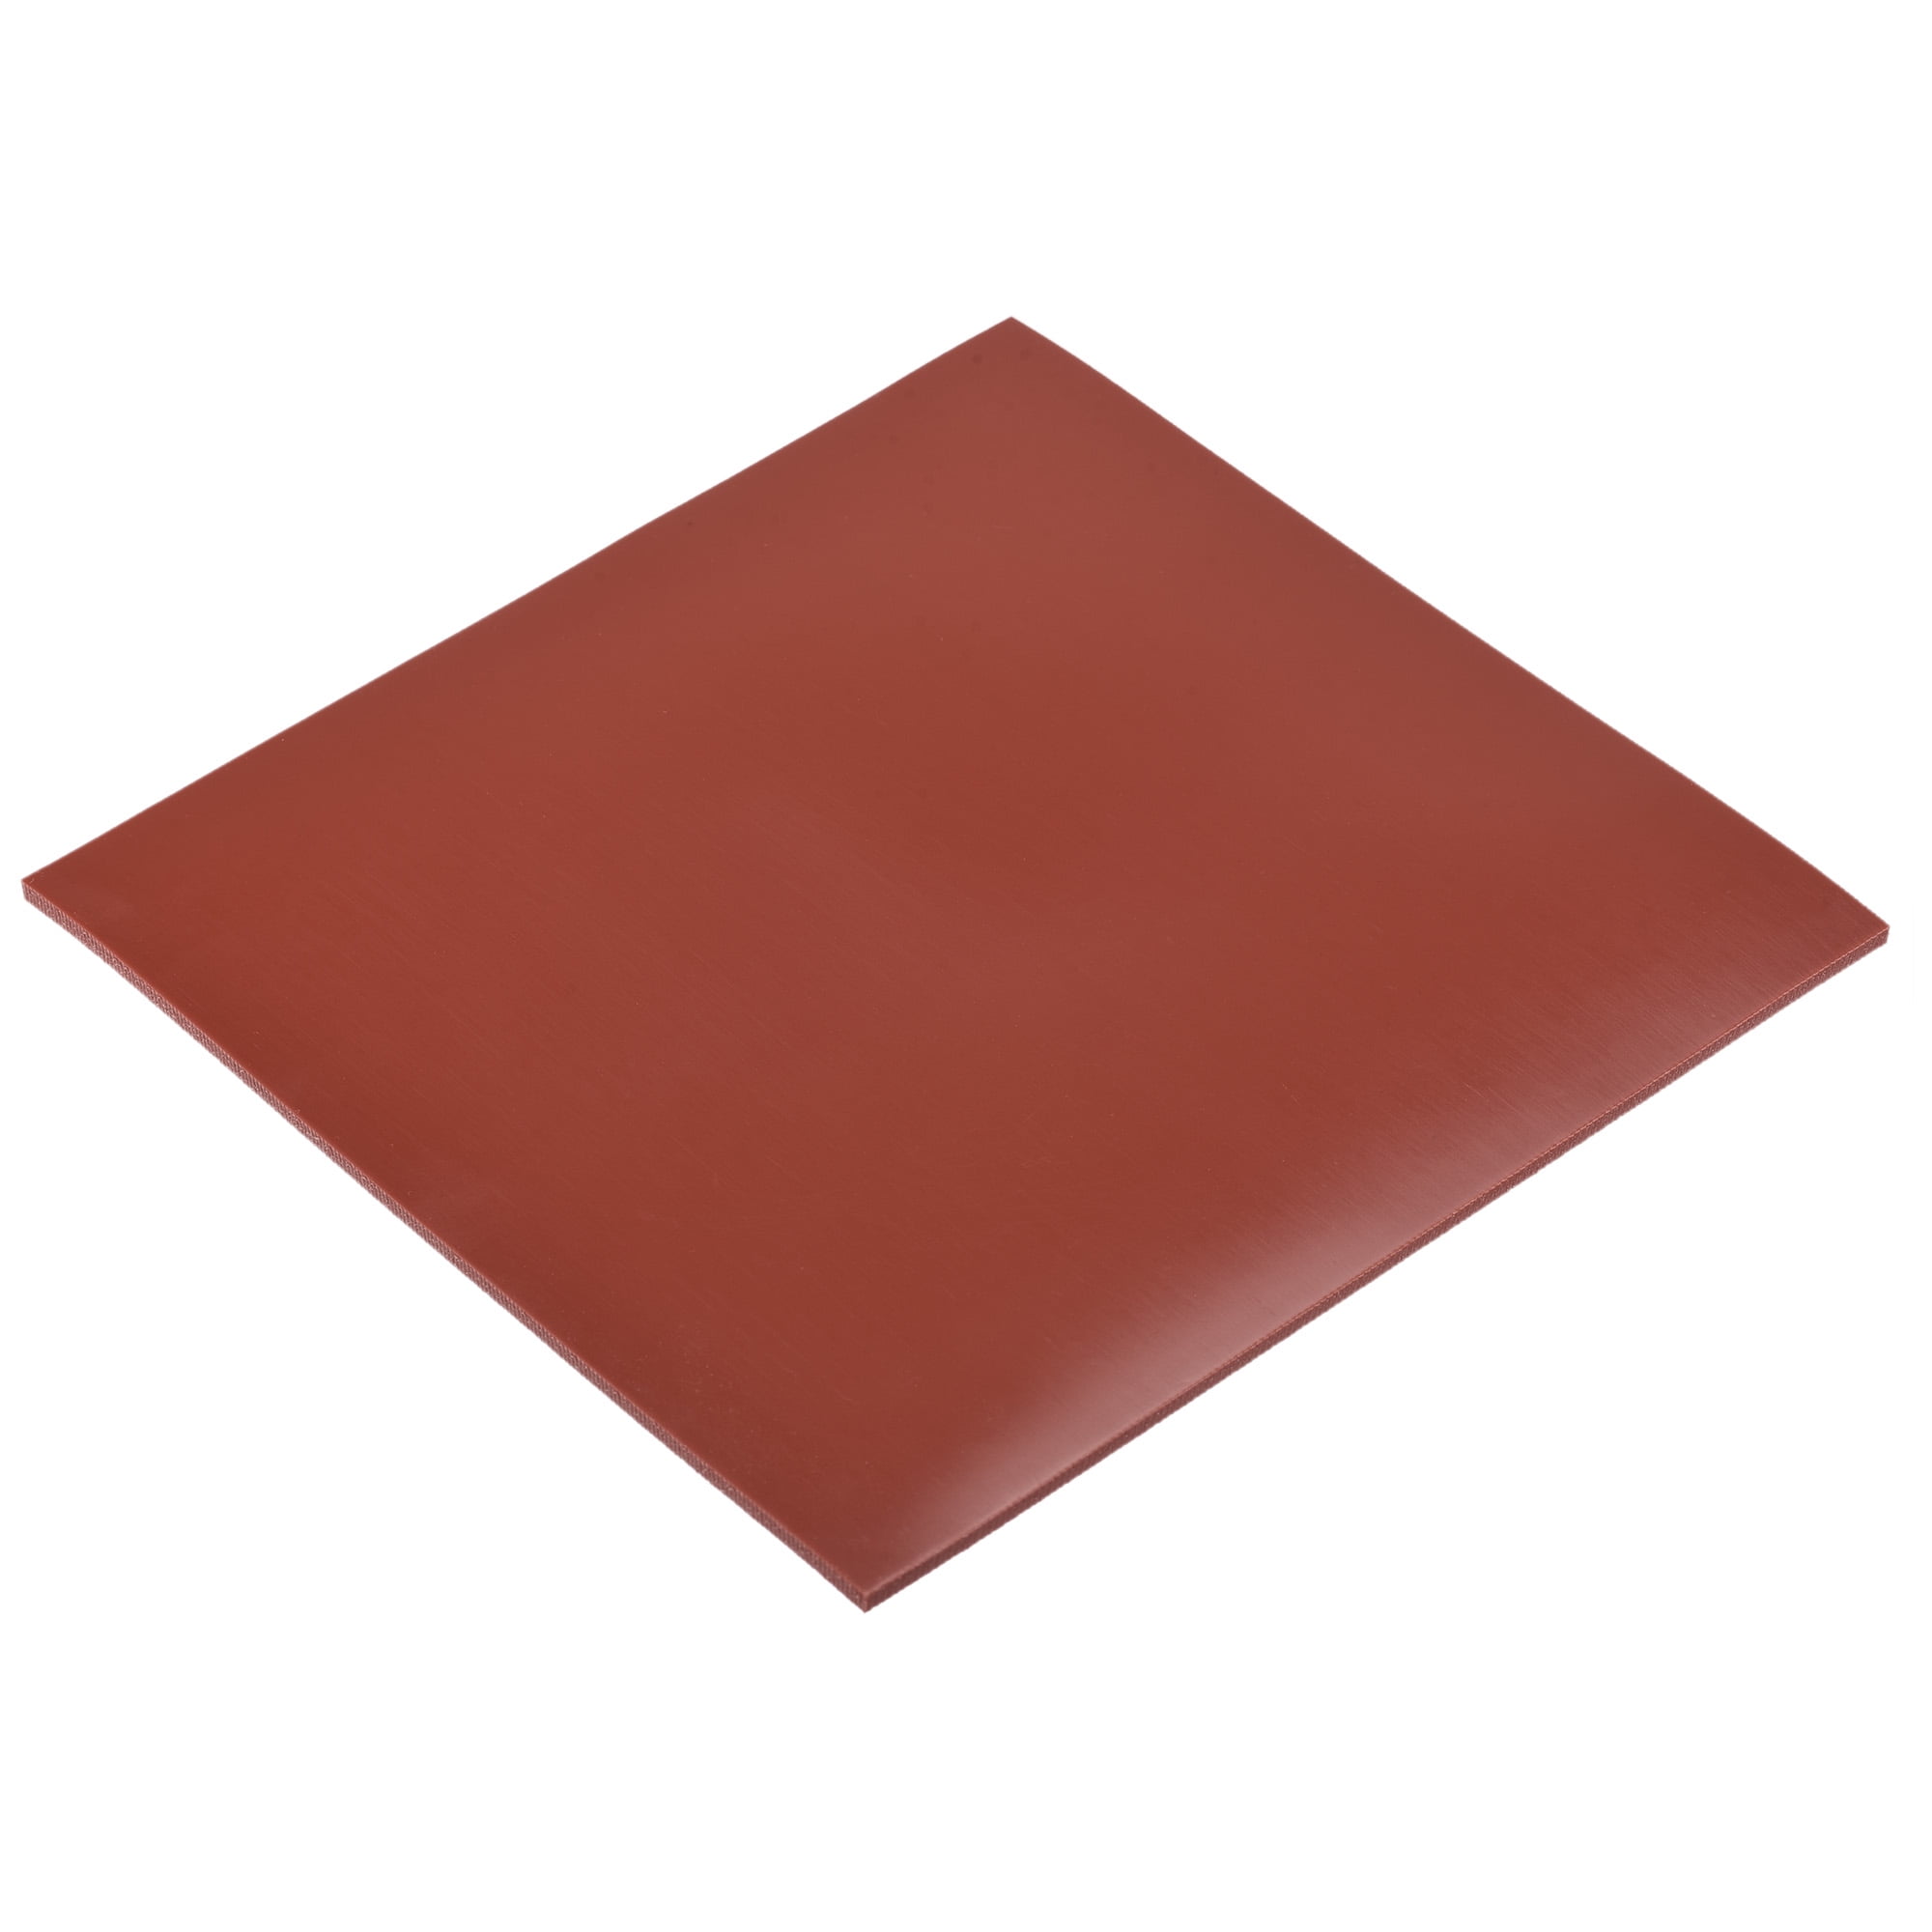 Uxcell Silicone Rubber Sheet Mat 12x12inch/30.5cm Red Rubber Pad for Furniture, Anti-Skid Door Sealing Strip, DIY Craft, Size: 12 x 12 x 0.04